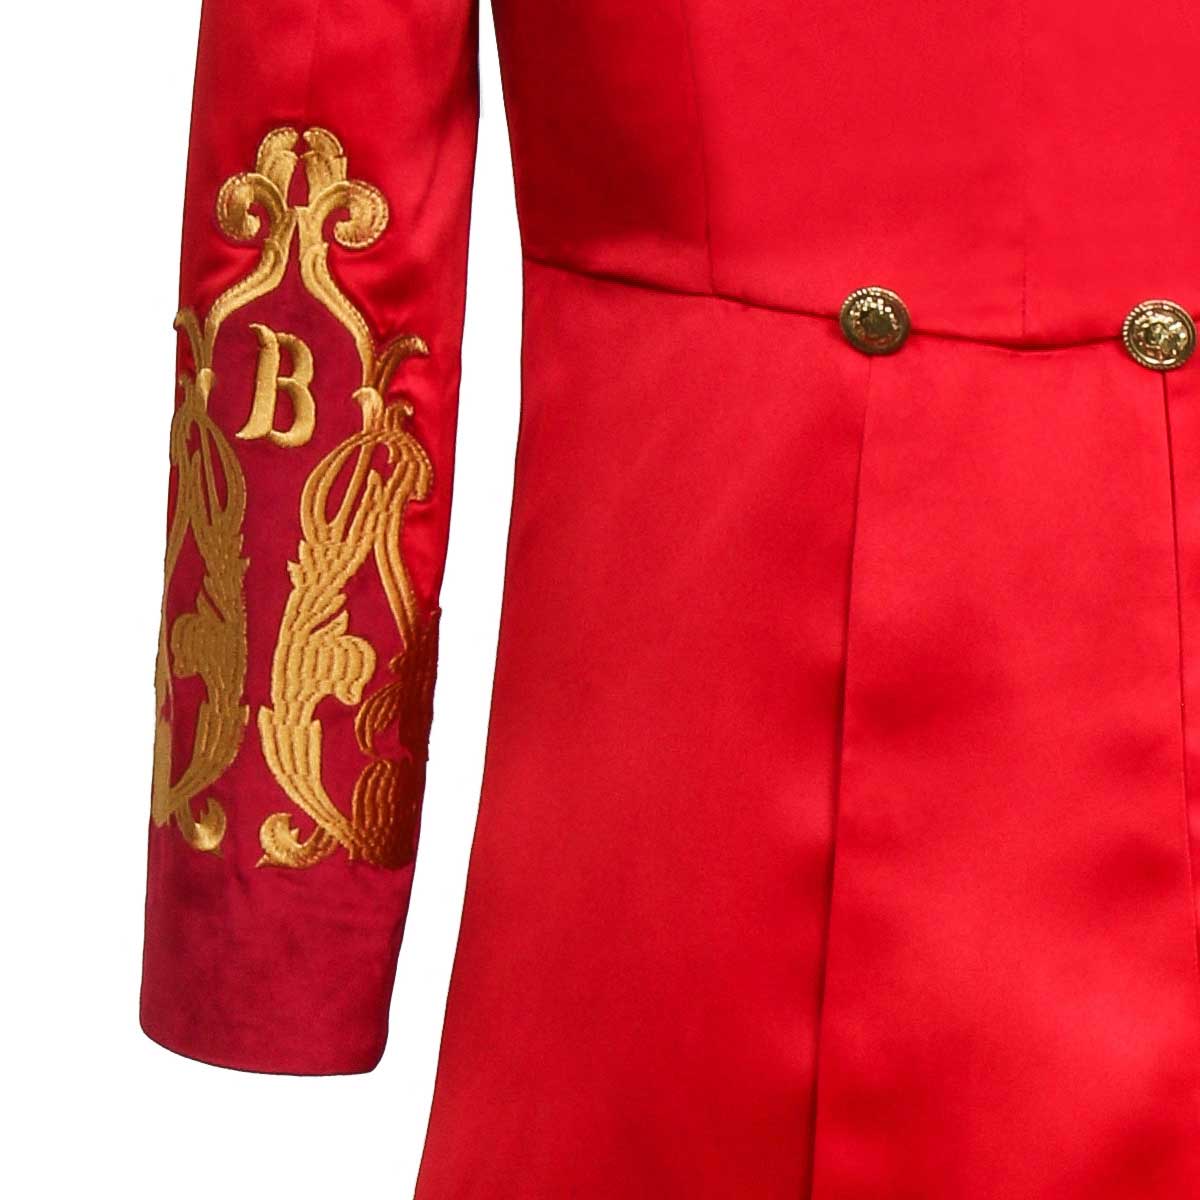 The Greatest Showman Cosplay Costume P. T. Barnum Circus Ringmaster Outfits (Ready to Ship)